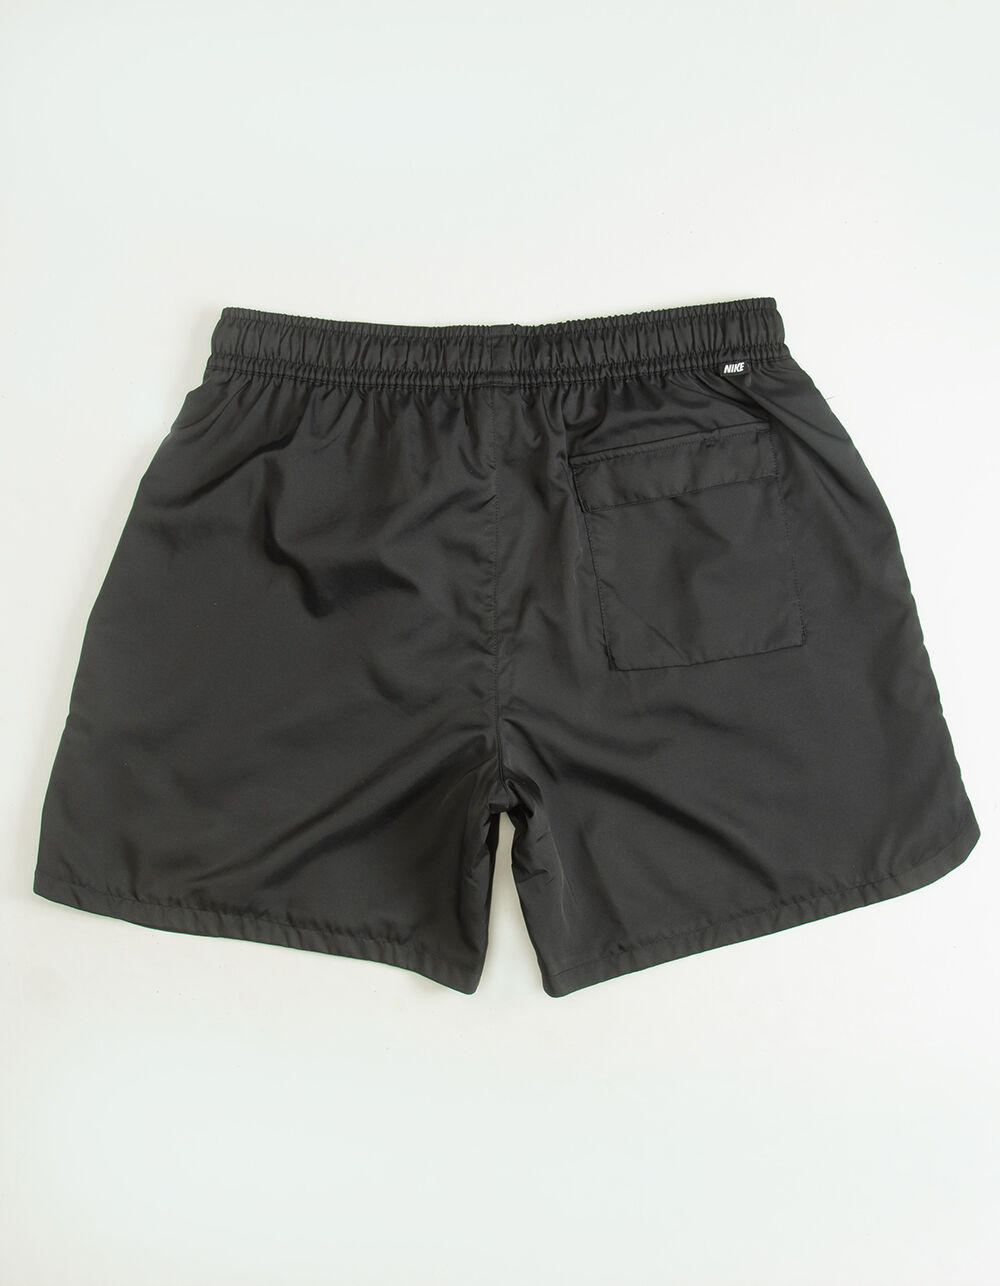 Men's Essential Woven 2-in-1 Training Shorts, Black